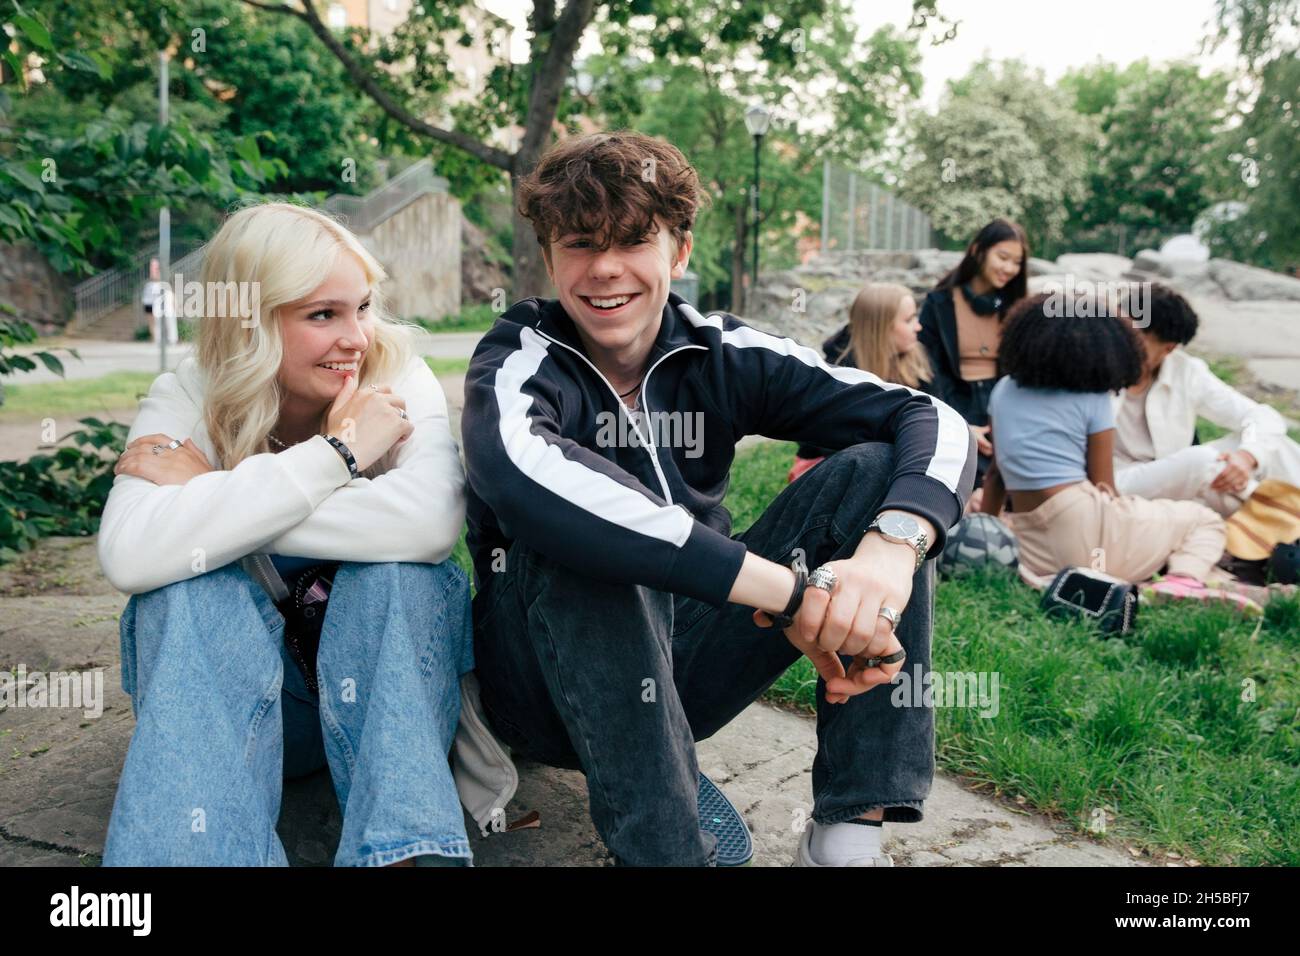 Portrait of smiling teenage boy sitting by blond girl with friends in background Stock Photo